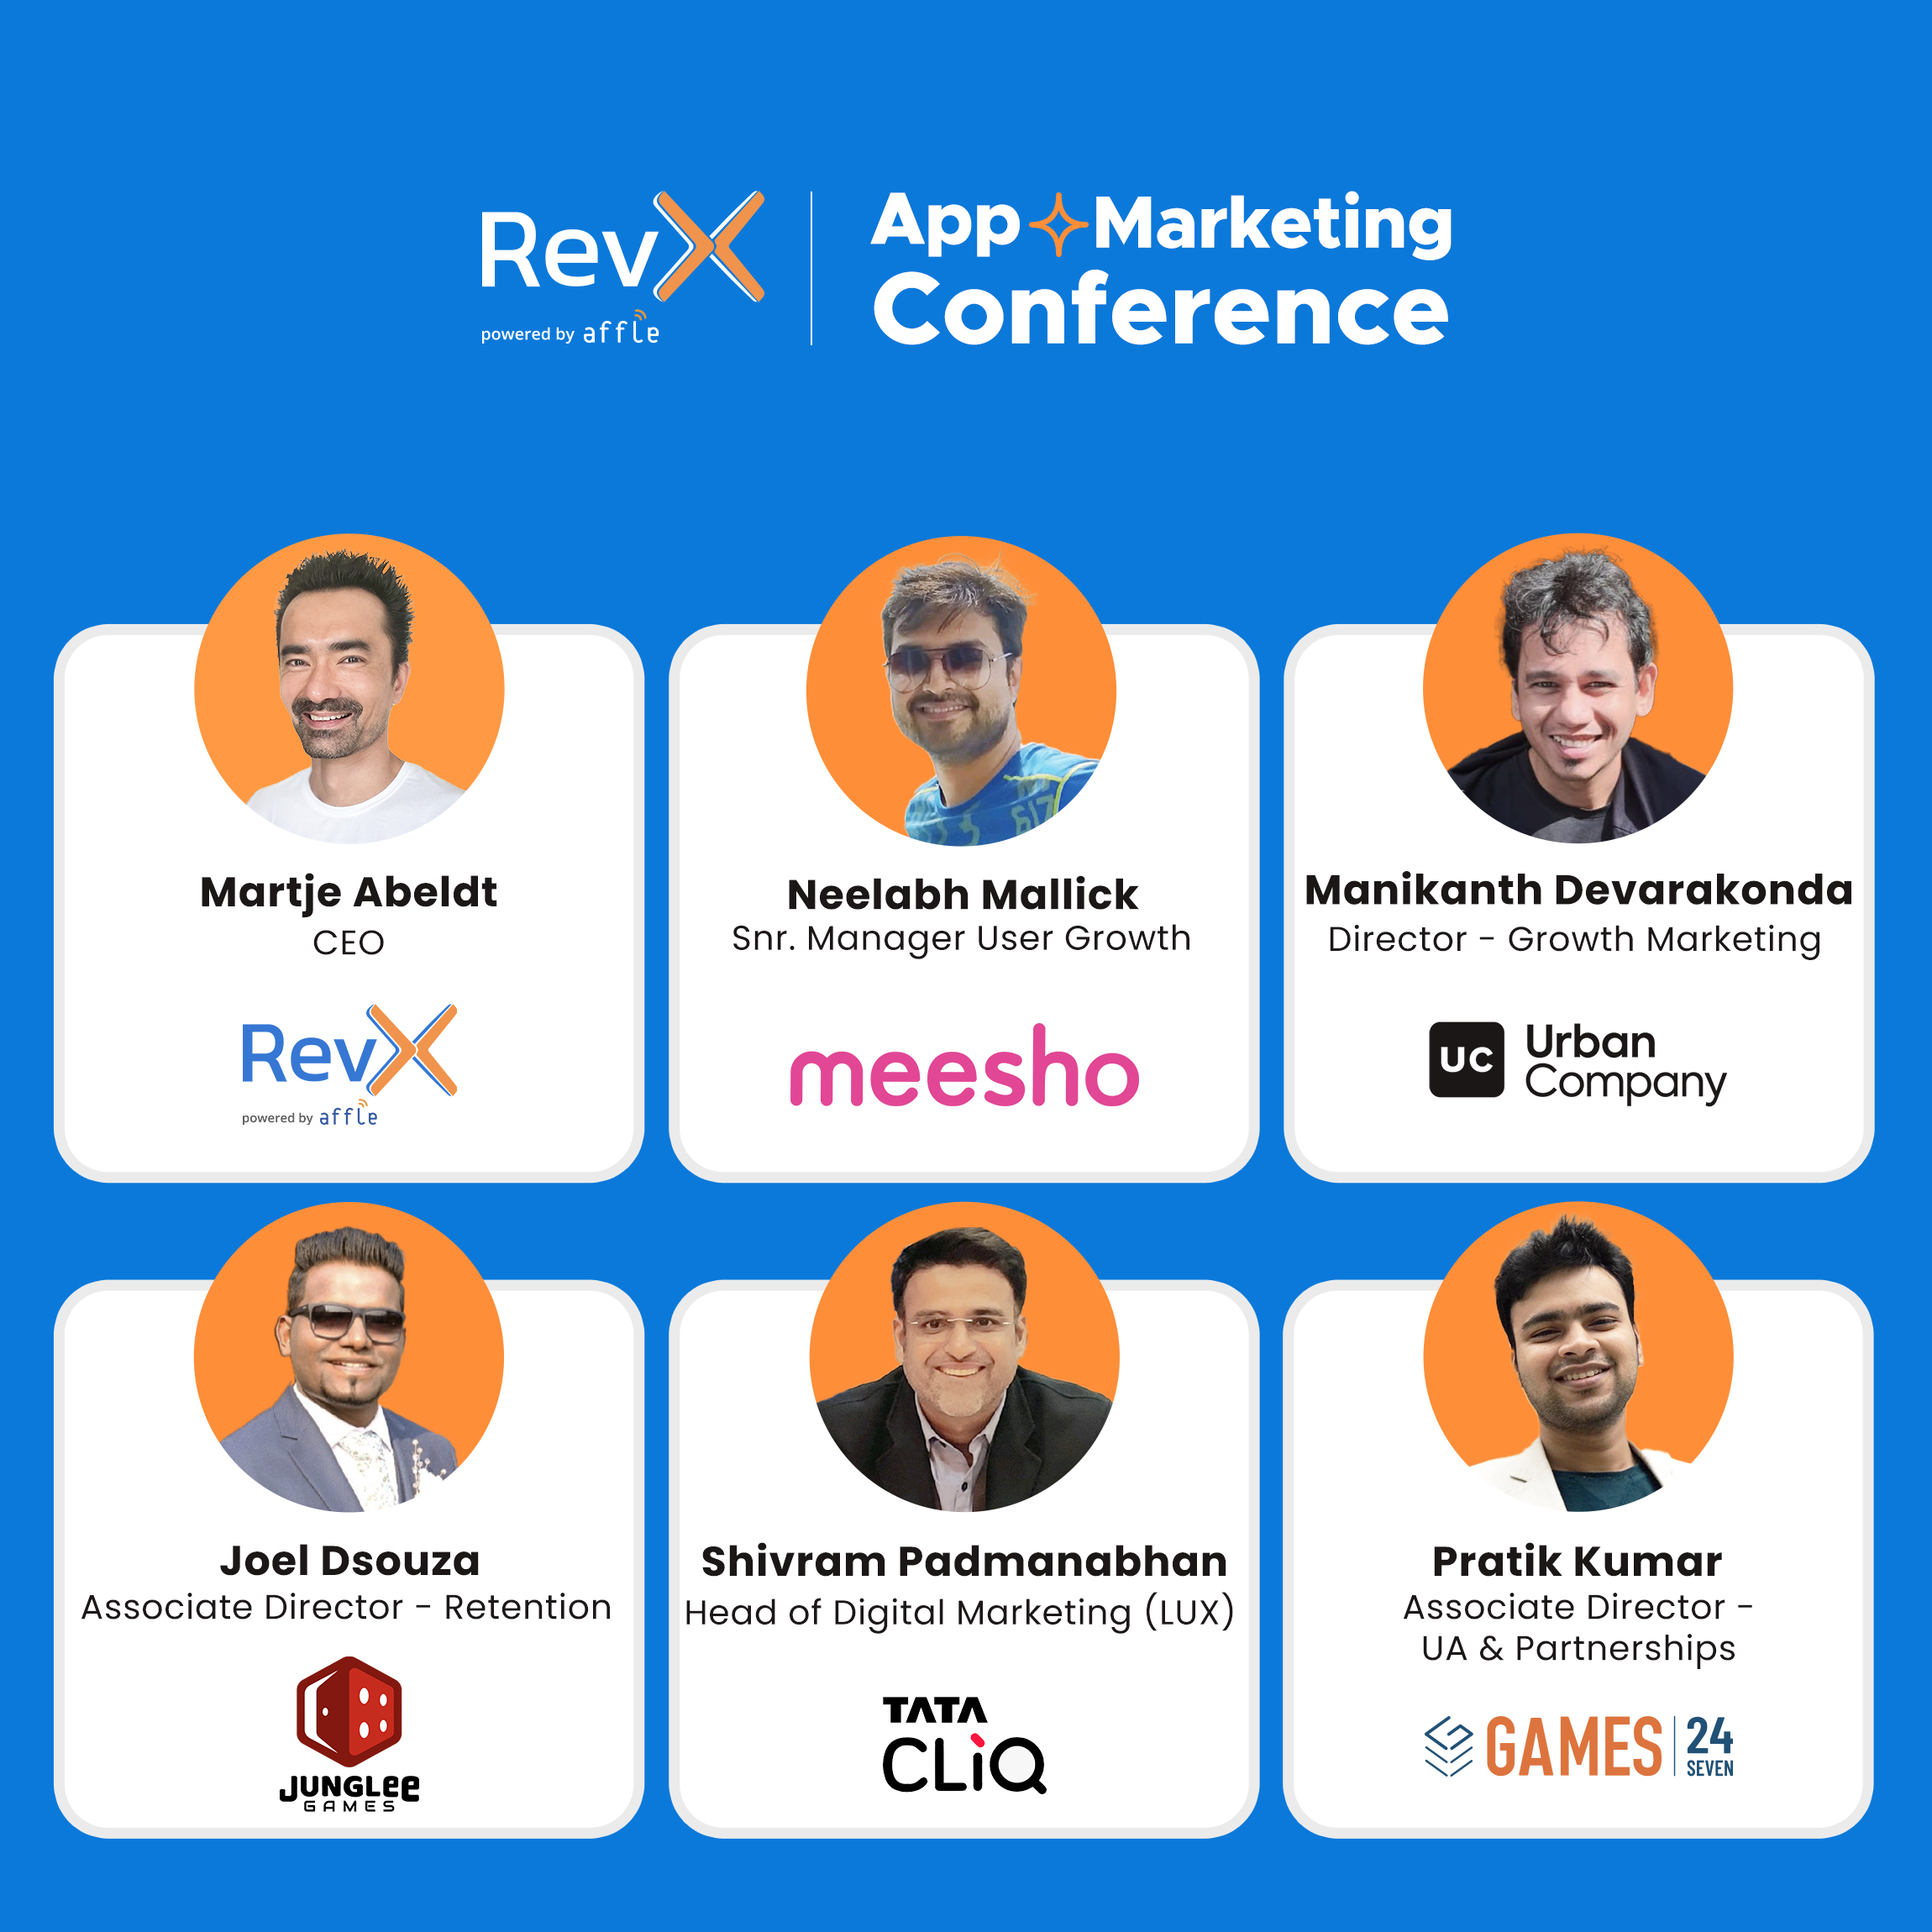 An overview of the panelists at the App Marketing Conference 